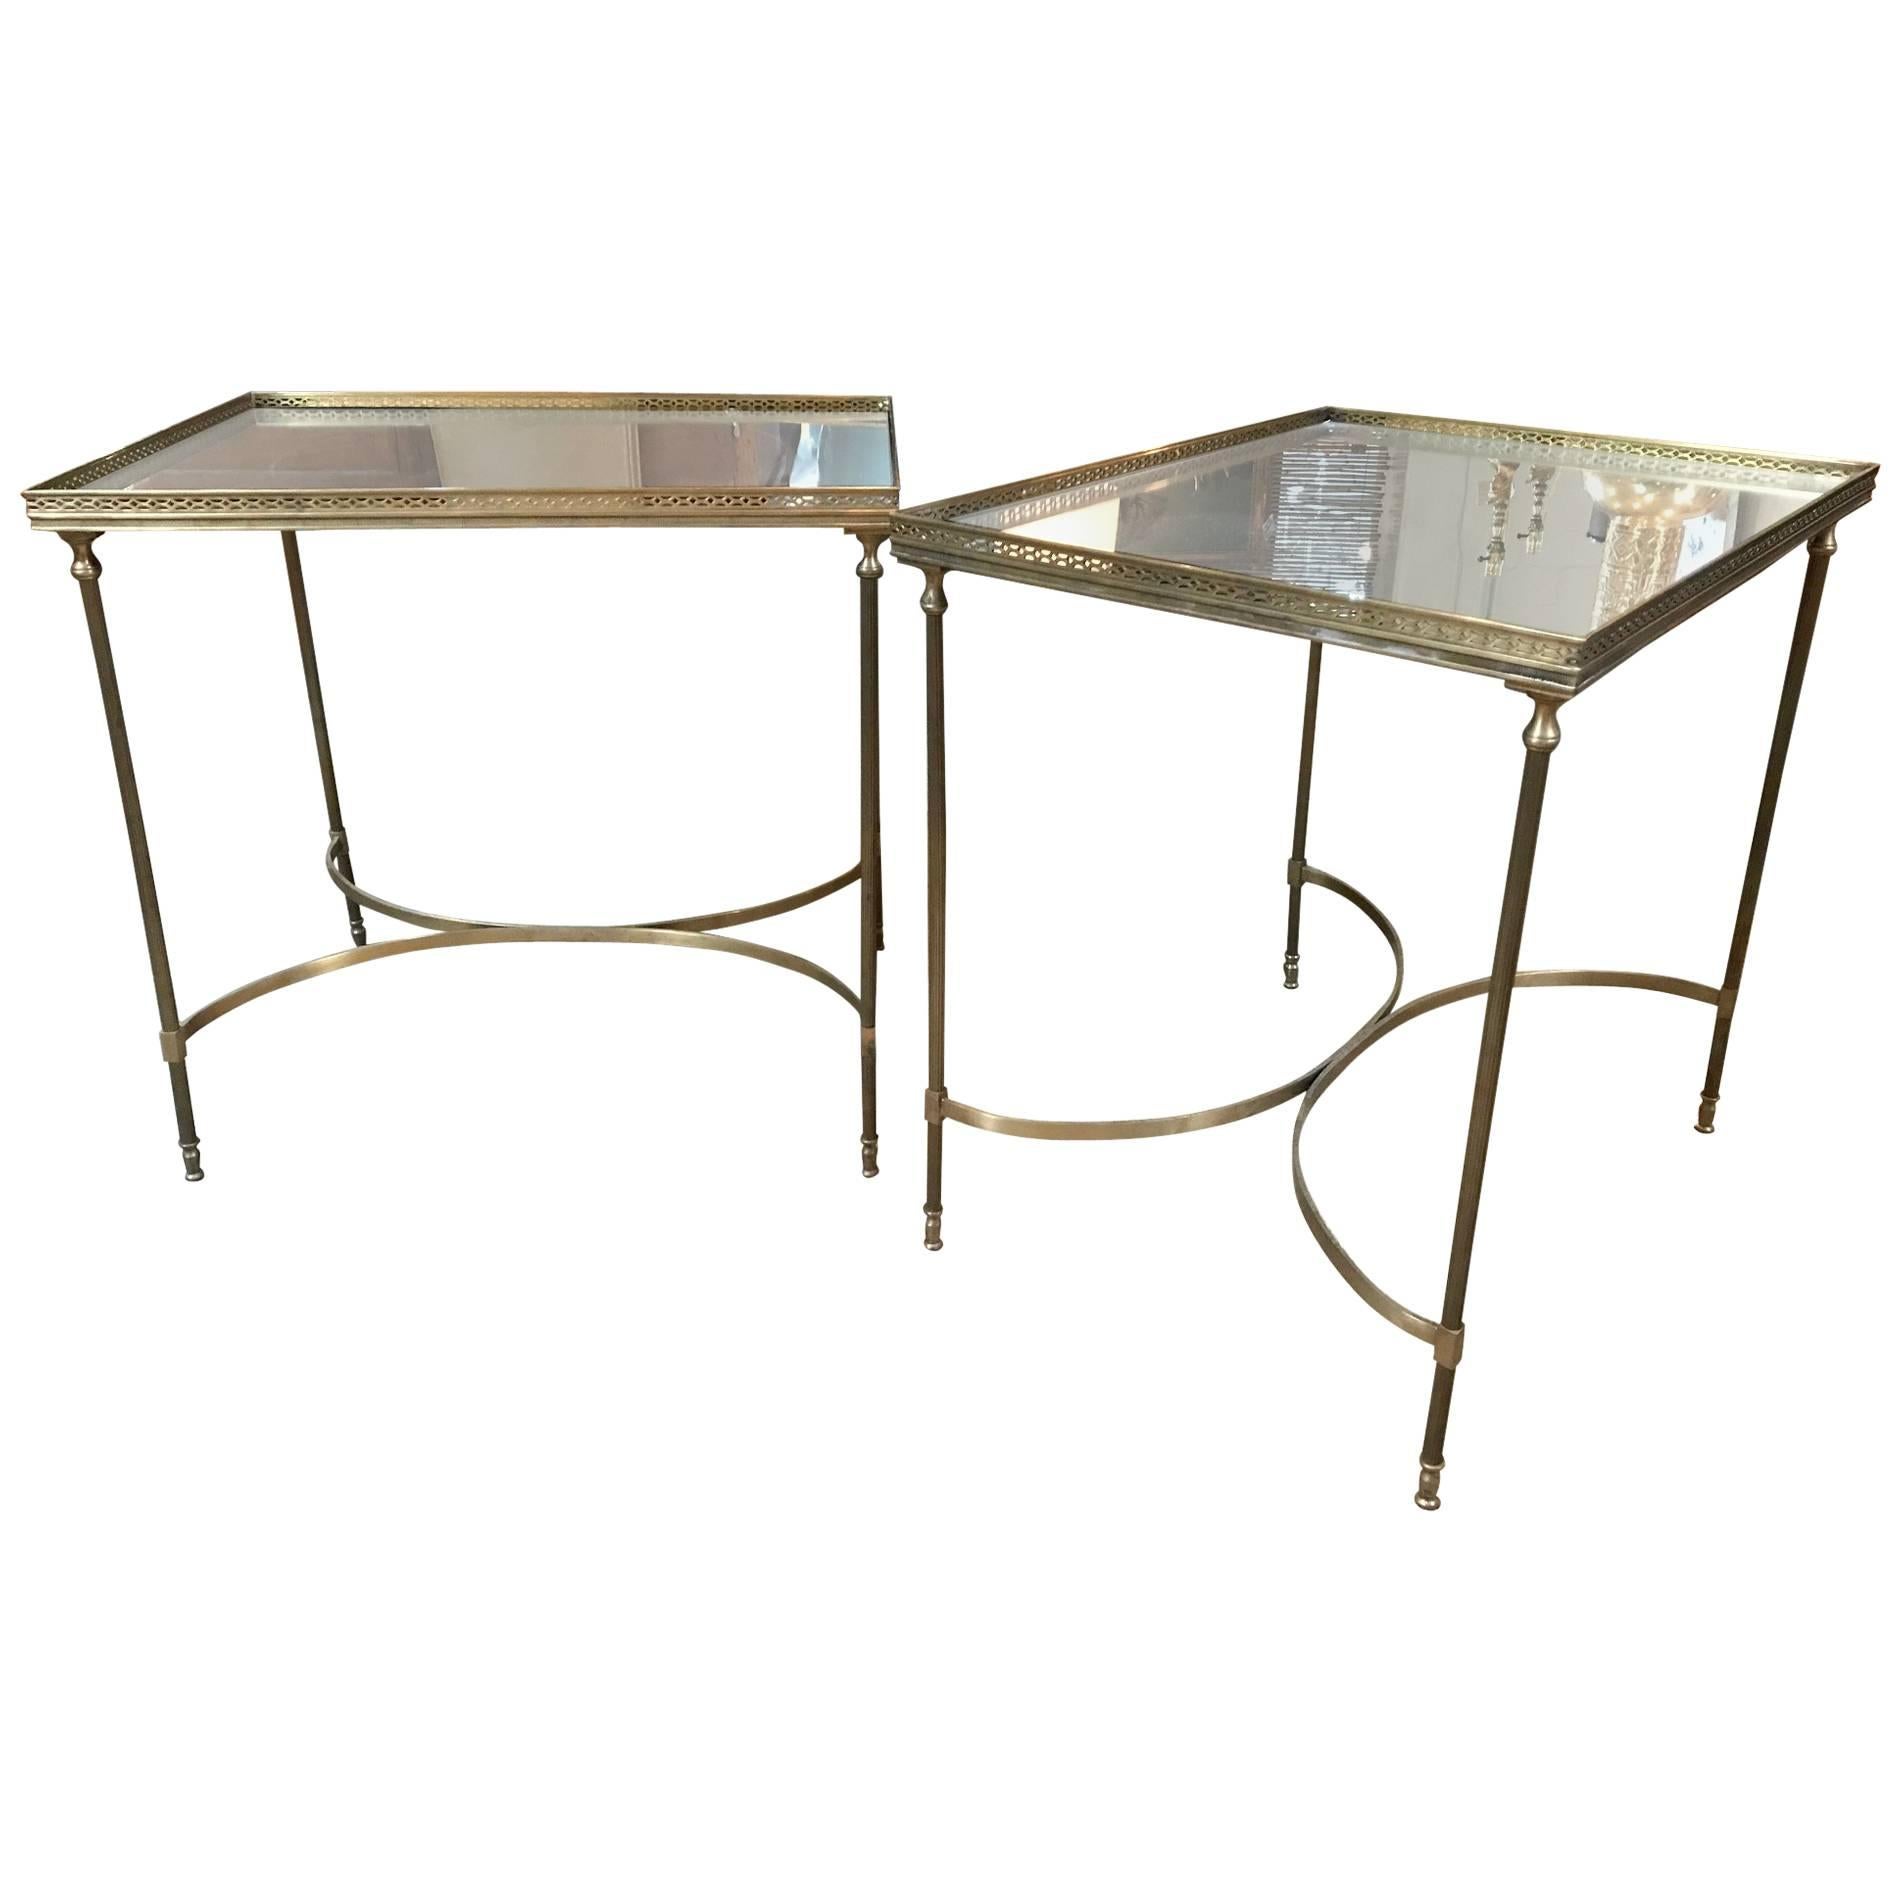 Brass and Mirrored Side Tables with Pierced Rail